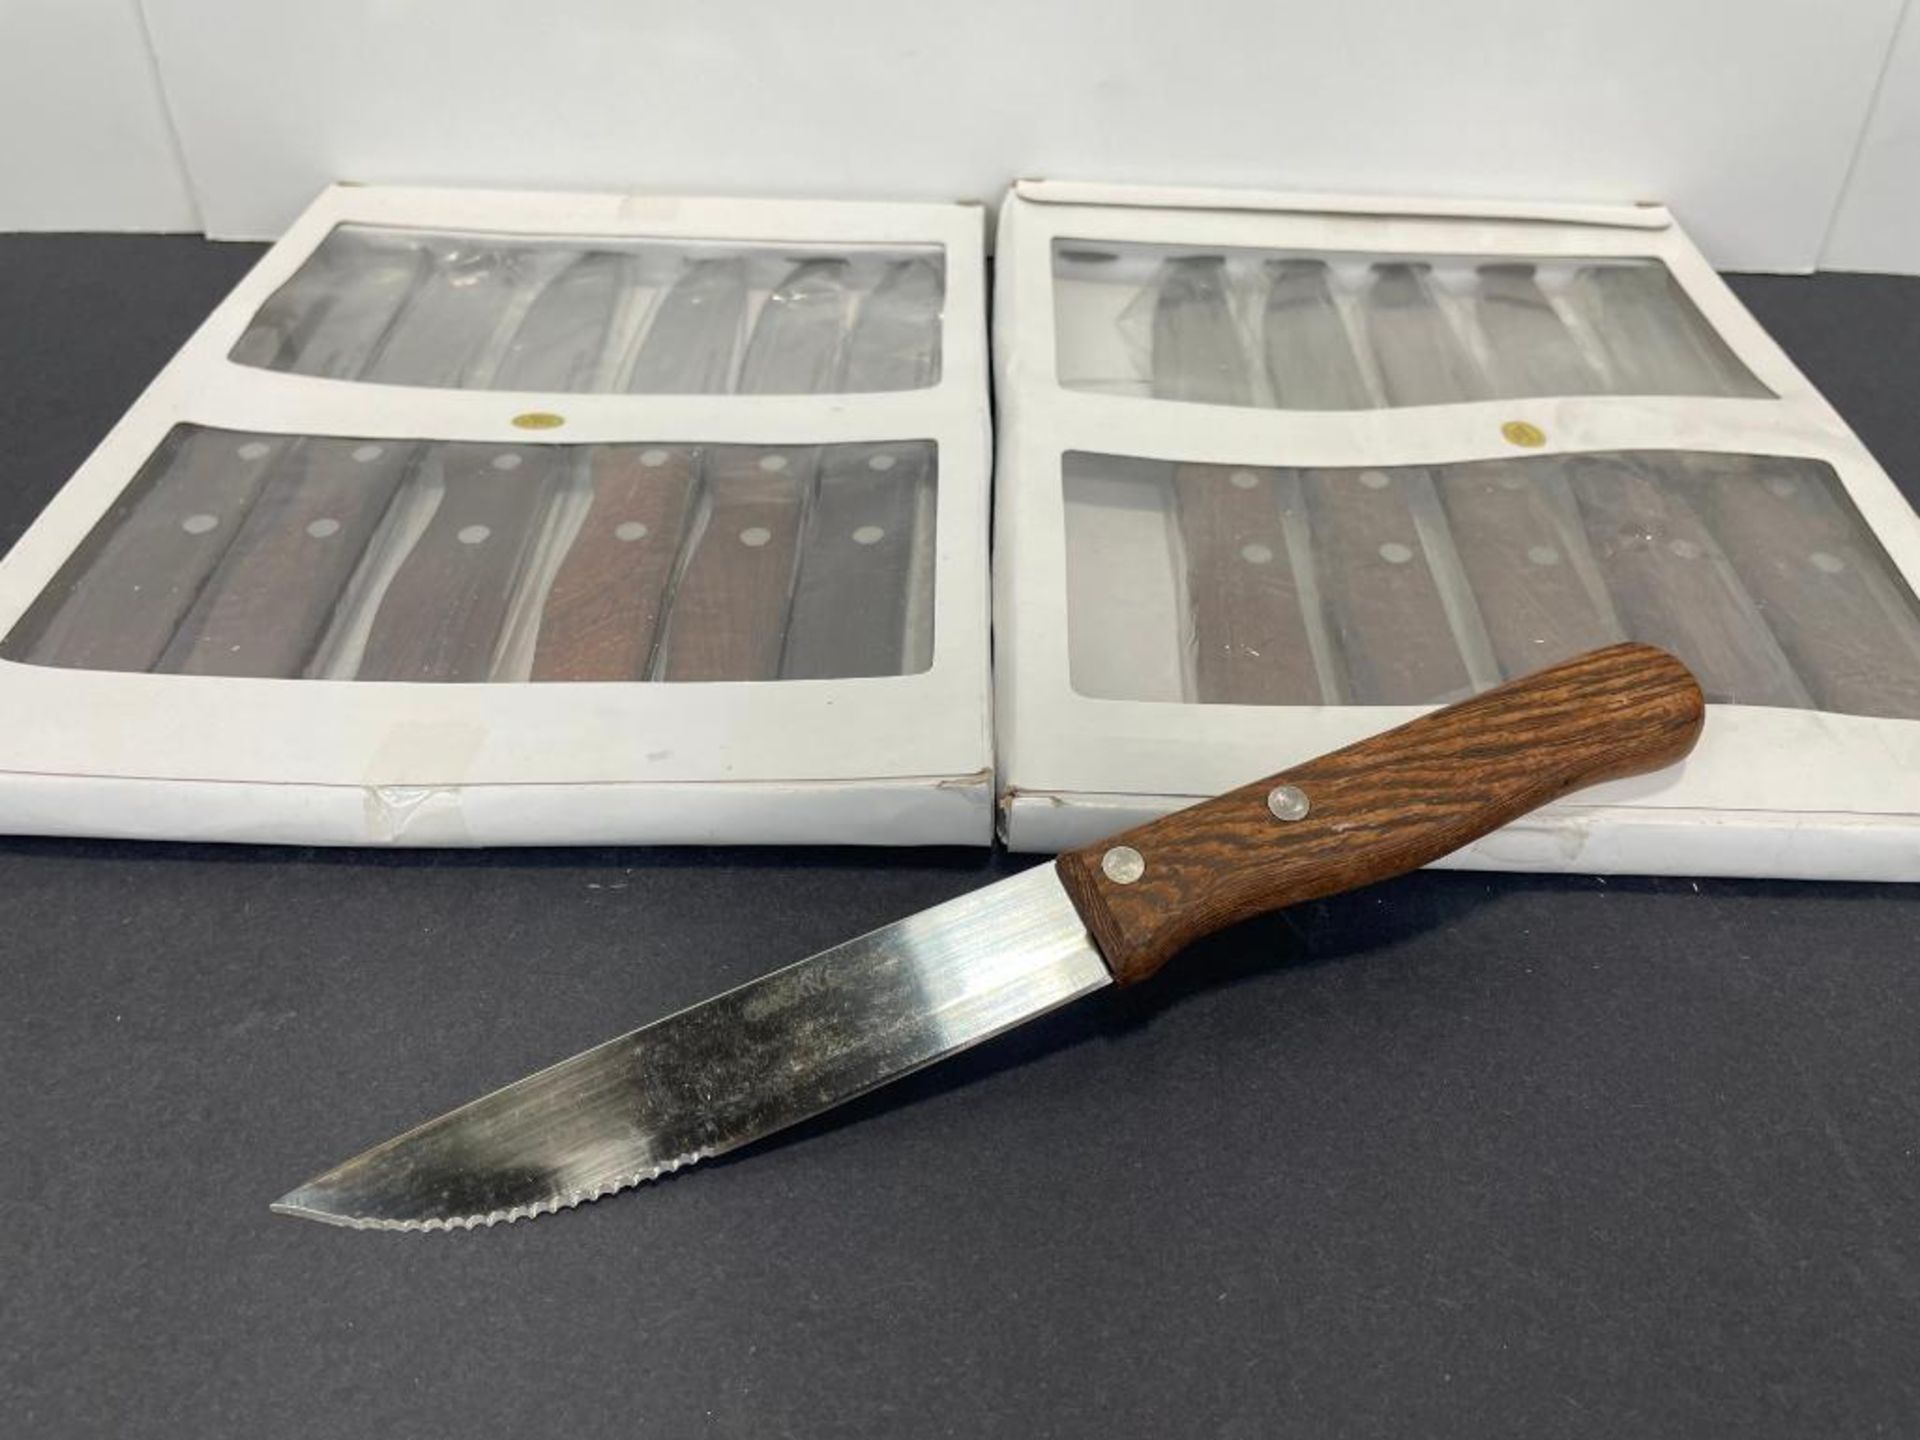 STEAK KNIVES, WOOD HANDLE, POINTED TIP - LOT OF 12